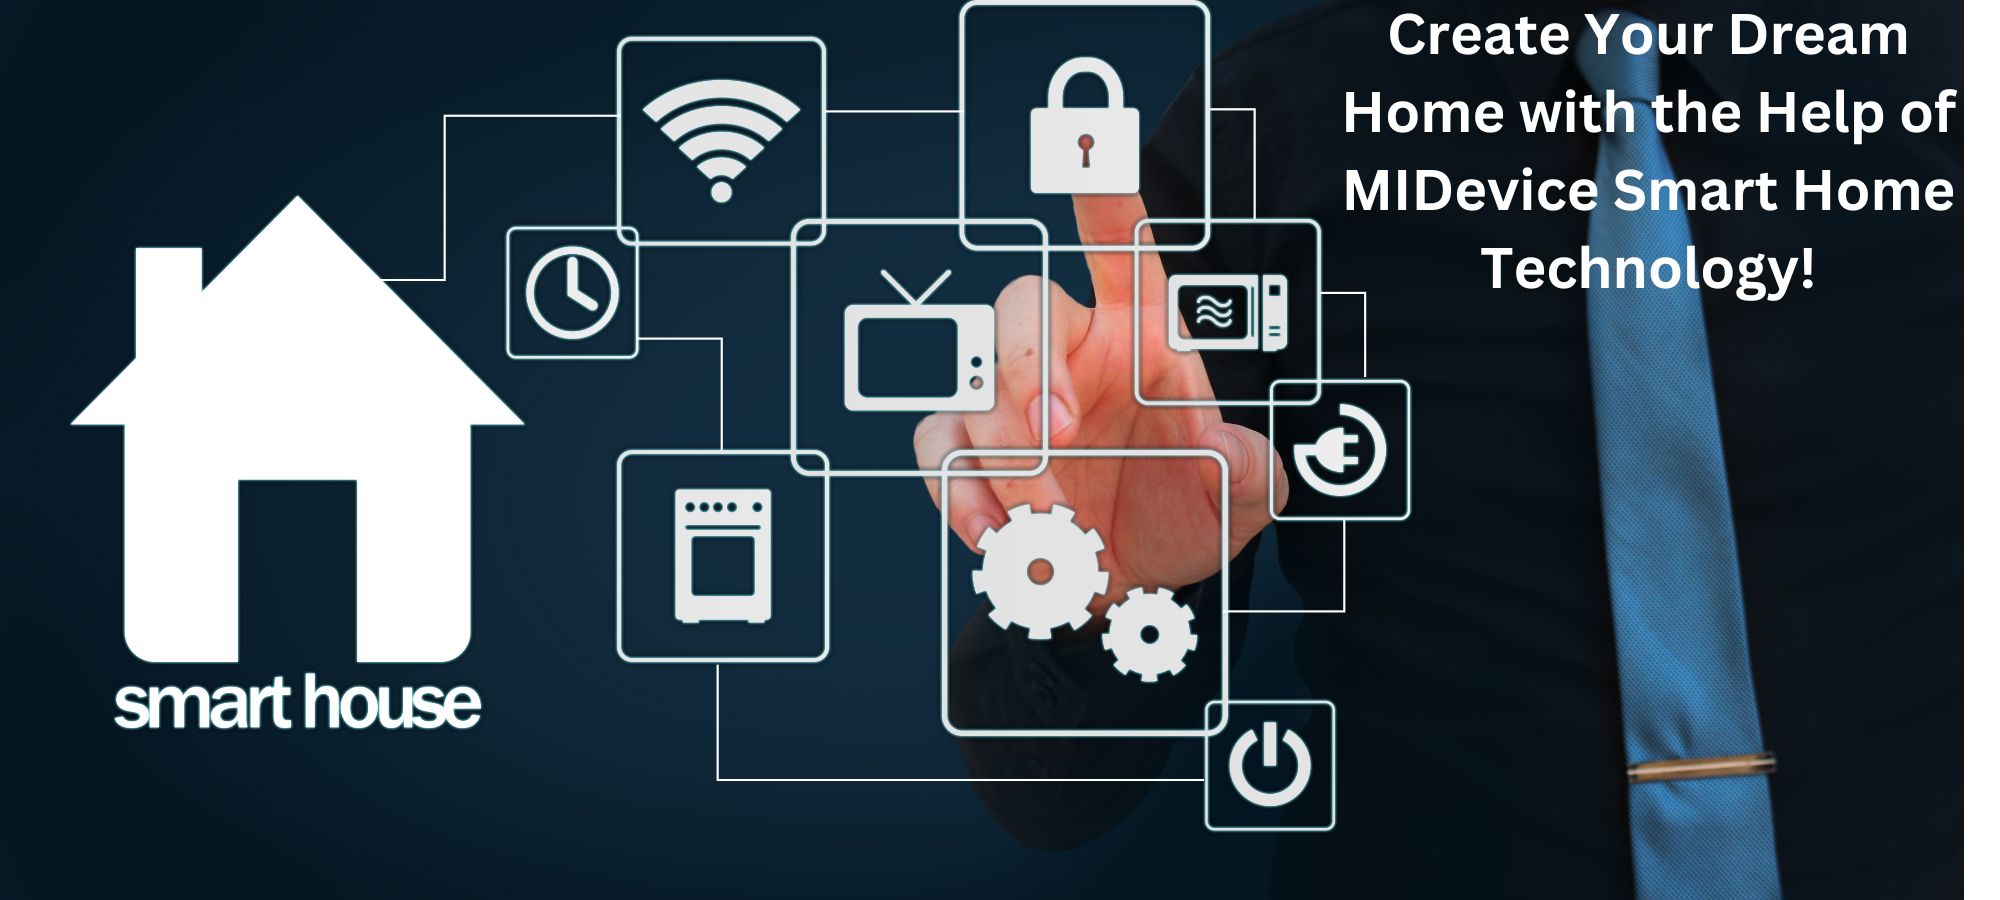 Create Your Dream Home with the Help of MIDevice Smart Home Technology!